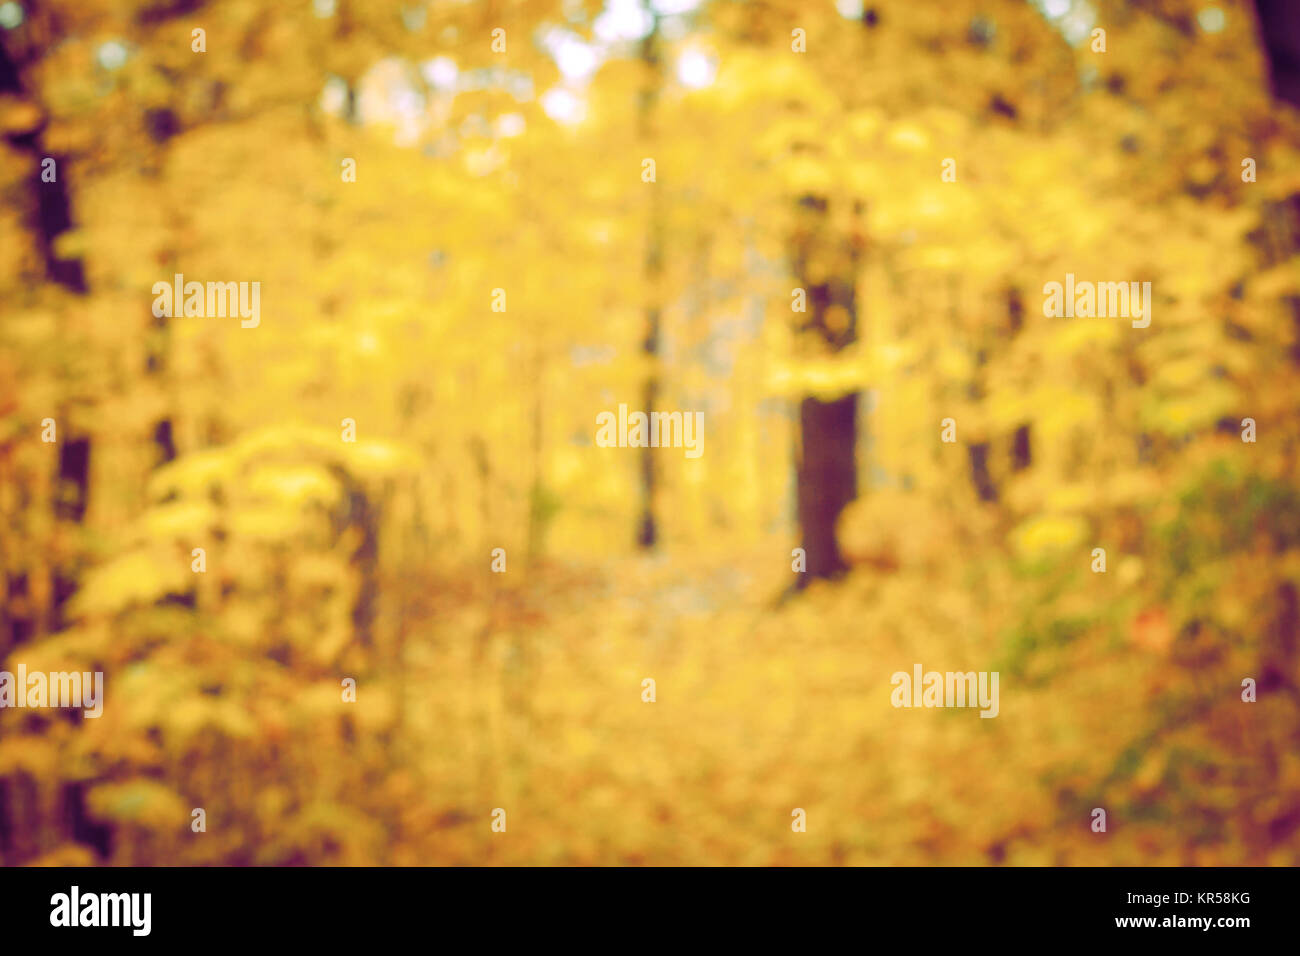 Autumn forest blurred background Stock Photo